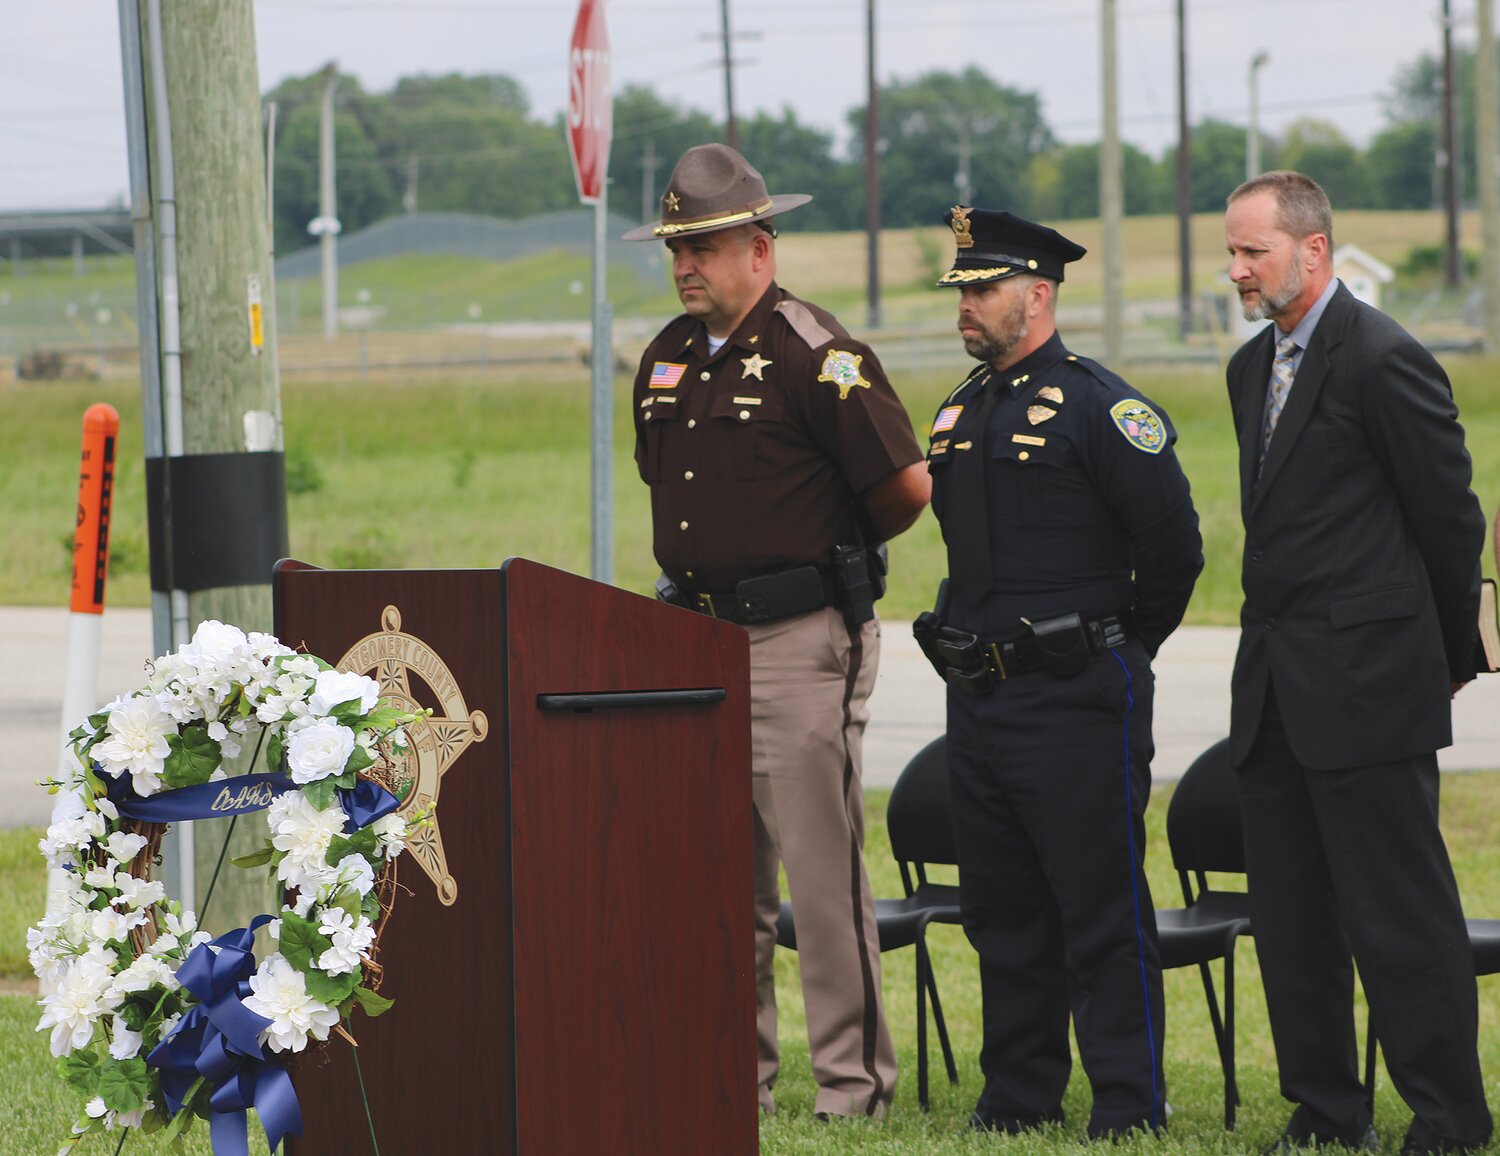 Montgomery County Sheriff Ryan Needham, Crawfordsville Police Chief Aaron Mattingly and MCSO chaplain Jamie Cevela stand during the memorial ceremony outside the county jail.